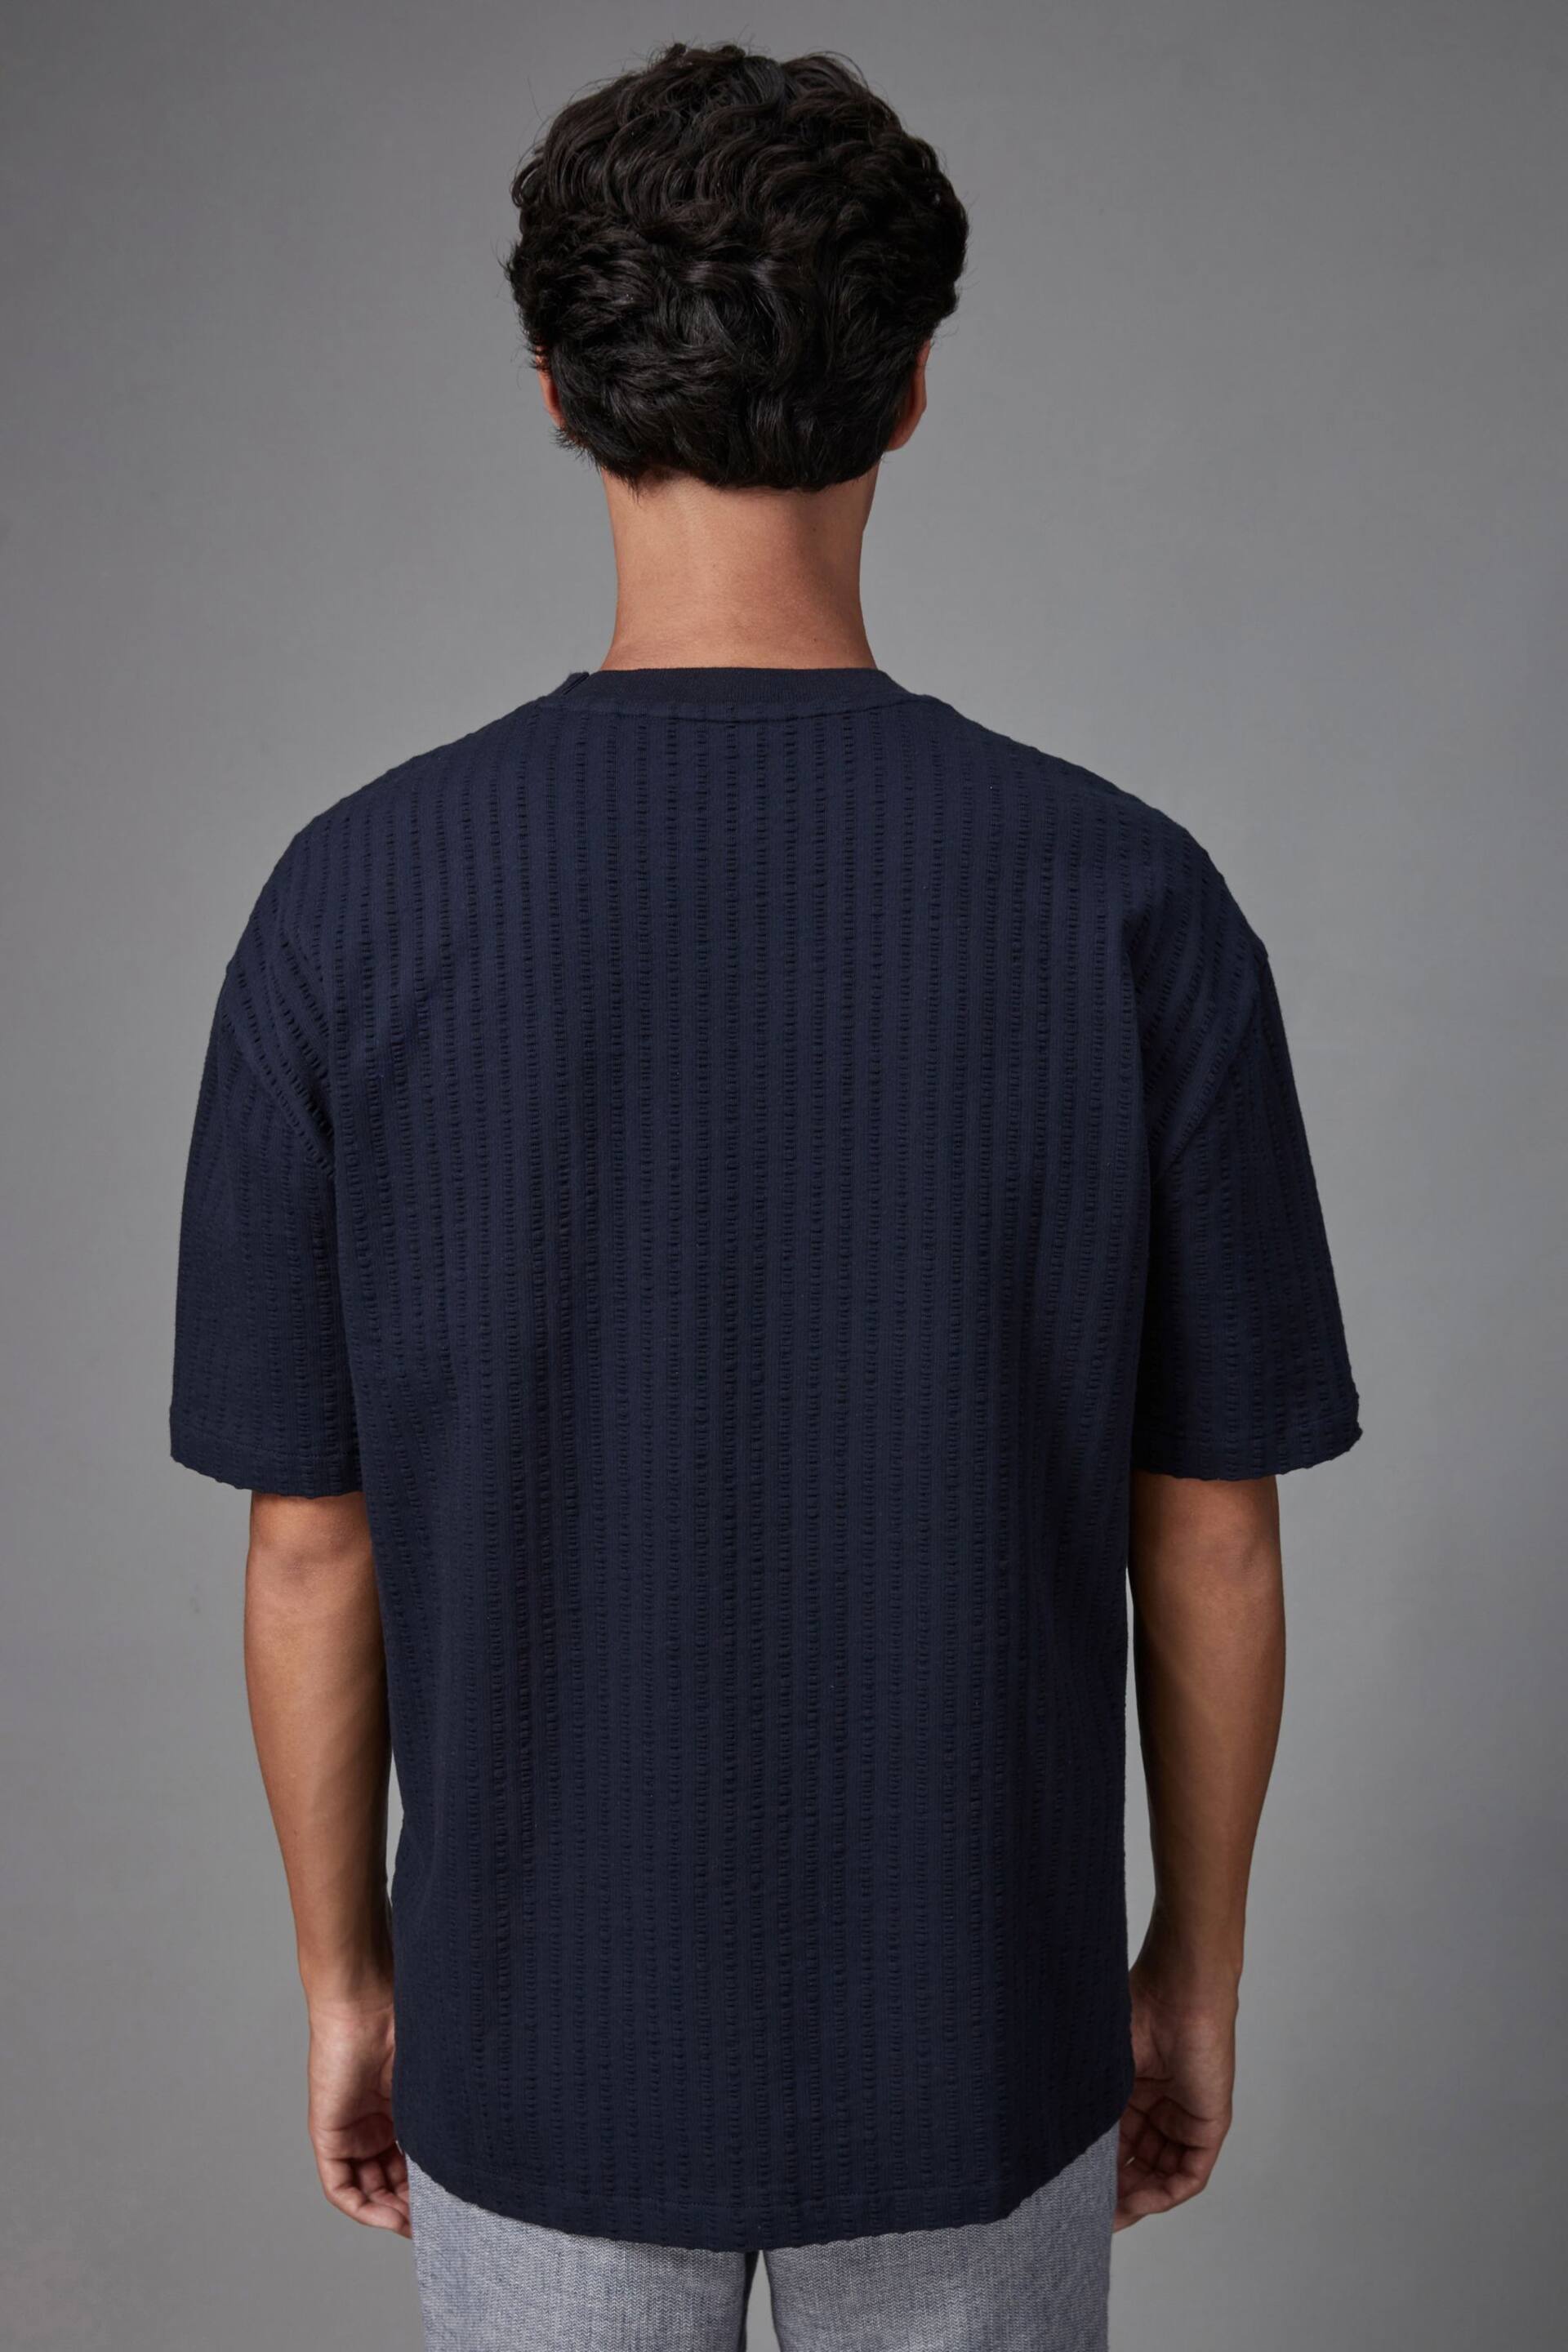 Navy Blue Relaxed Fit Seersucker Texture T-Shirt - Image 4 of 8